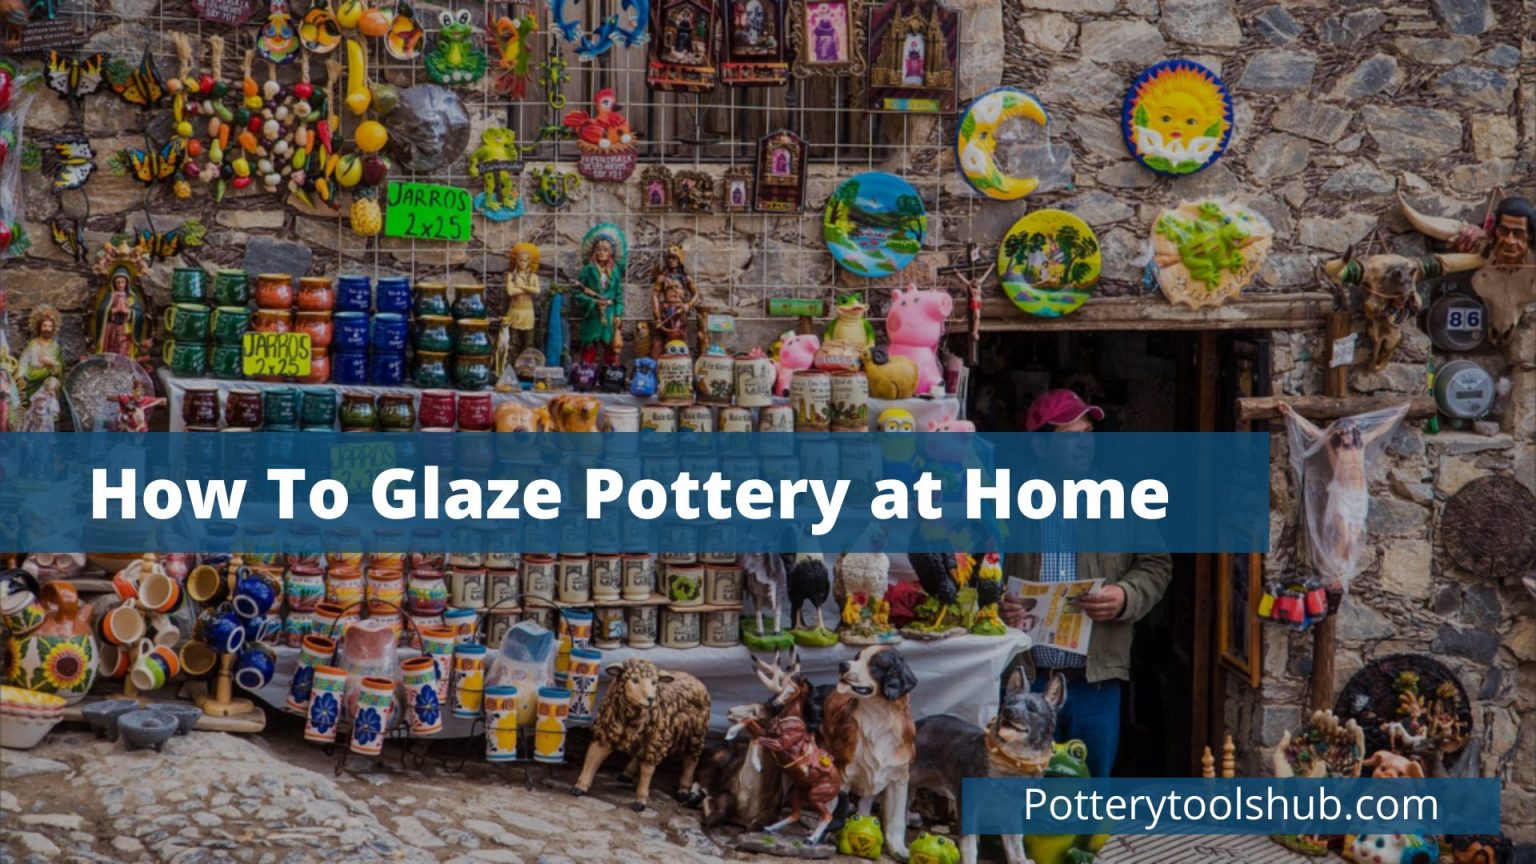 How to Glaze Pottery at Home – A Short and Easy Guide